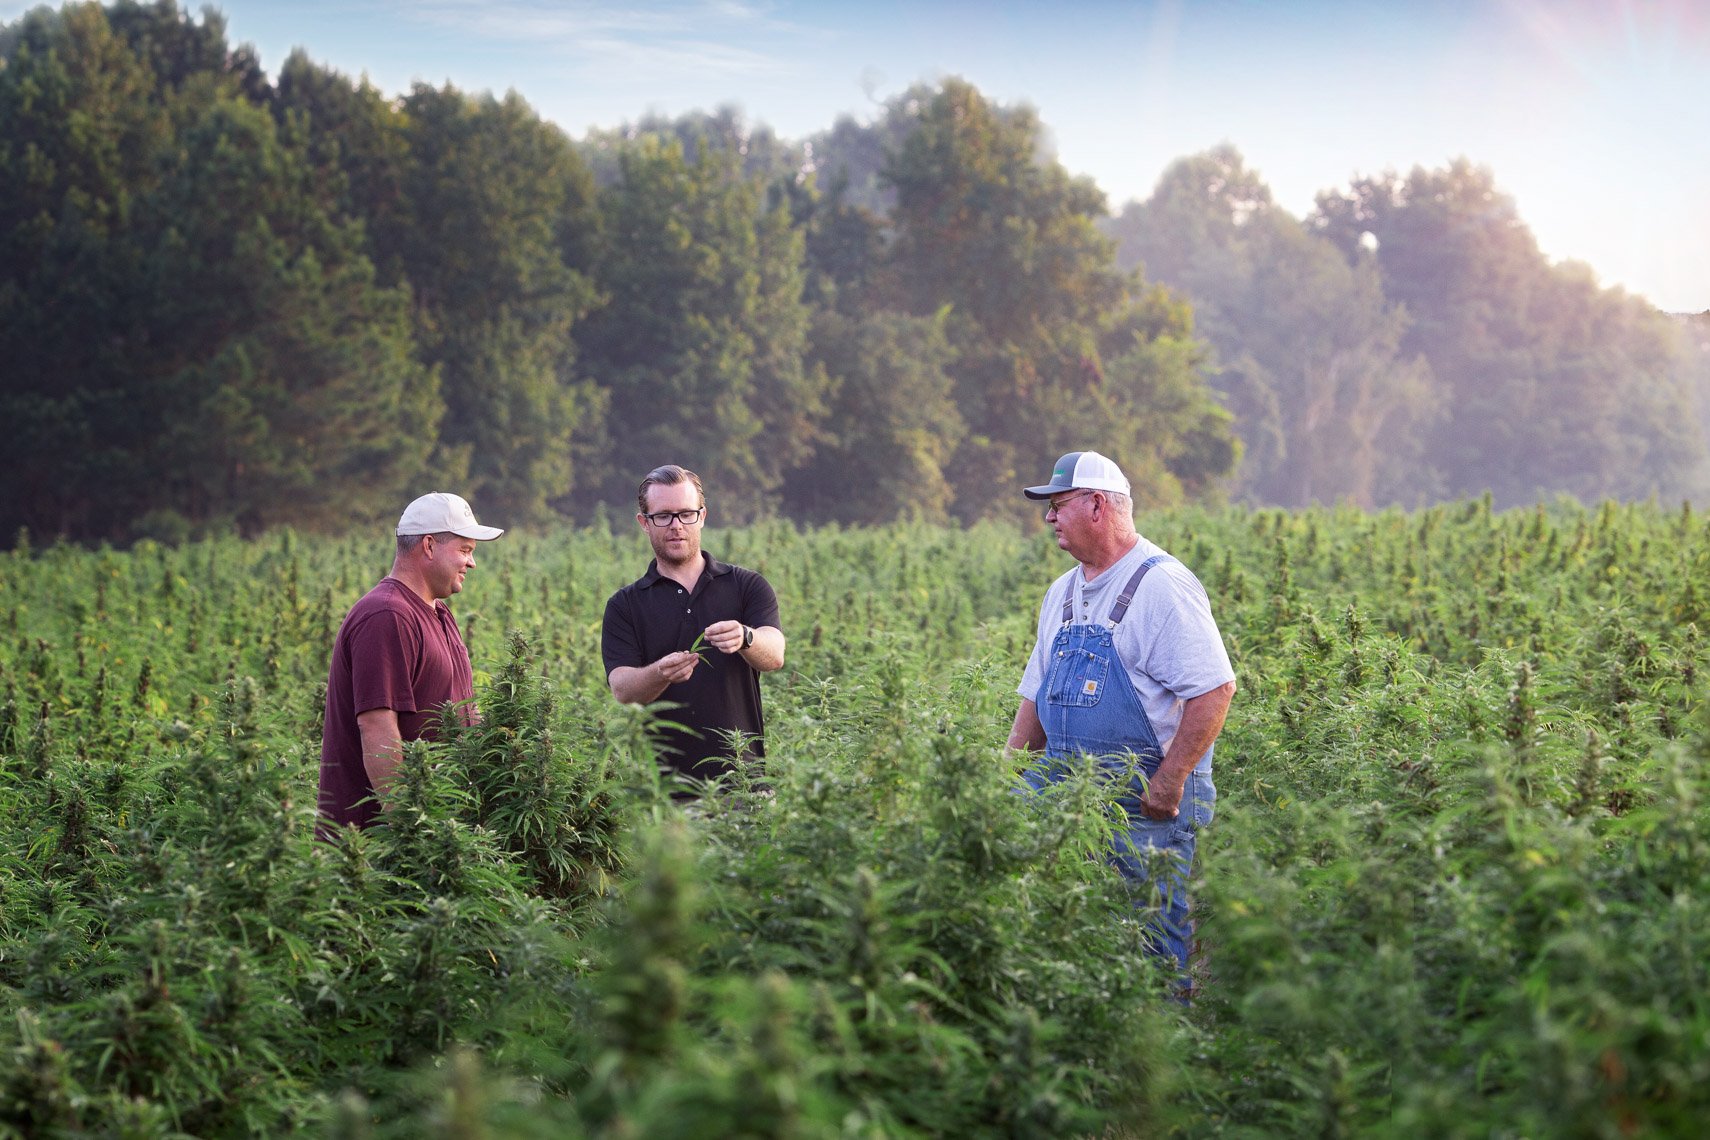 North_Carolina_Hemp_Farm_and_Farmers_for_Criticality_and_Aliance_One_20180904_photo_by_Justin_Kase_Conder_0513_Retouched_V02